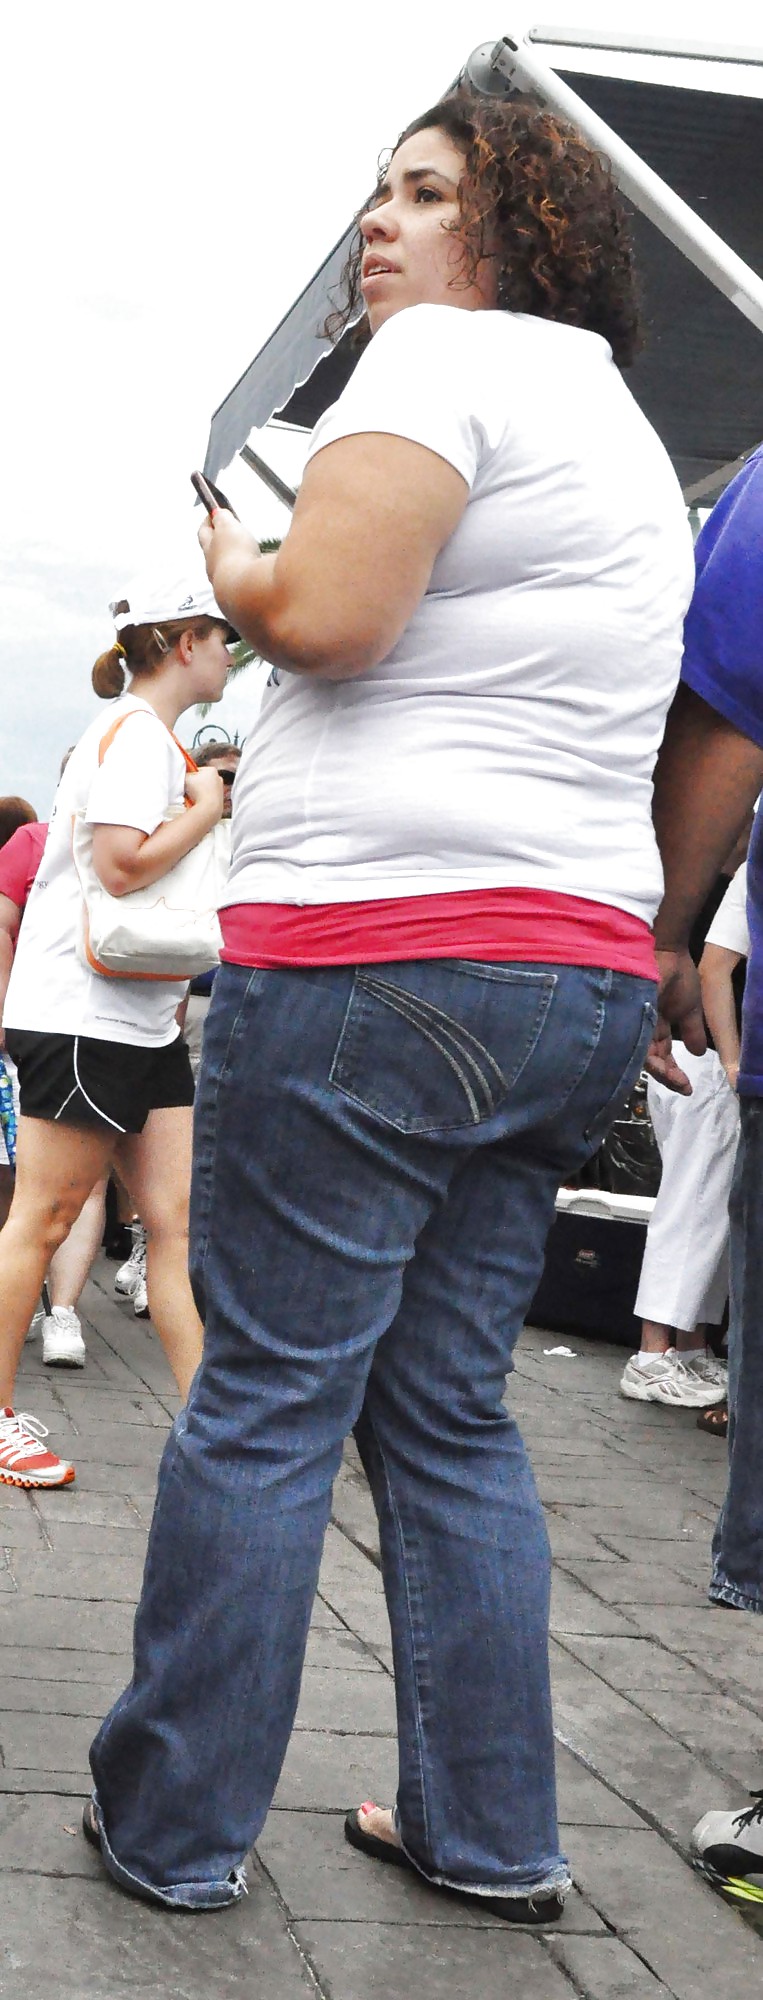 Fat Chick at the Food Trucks #13751033